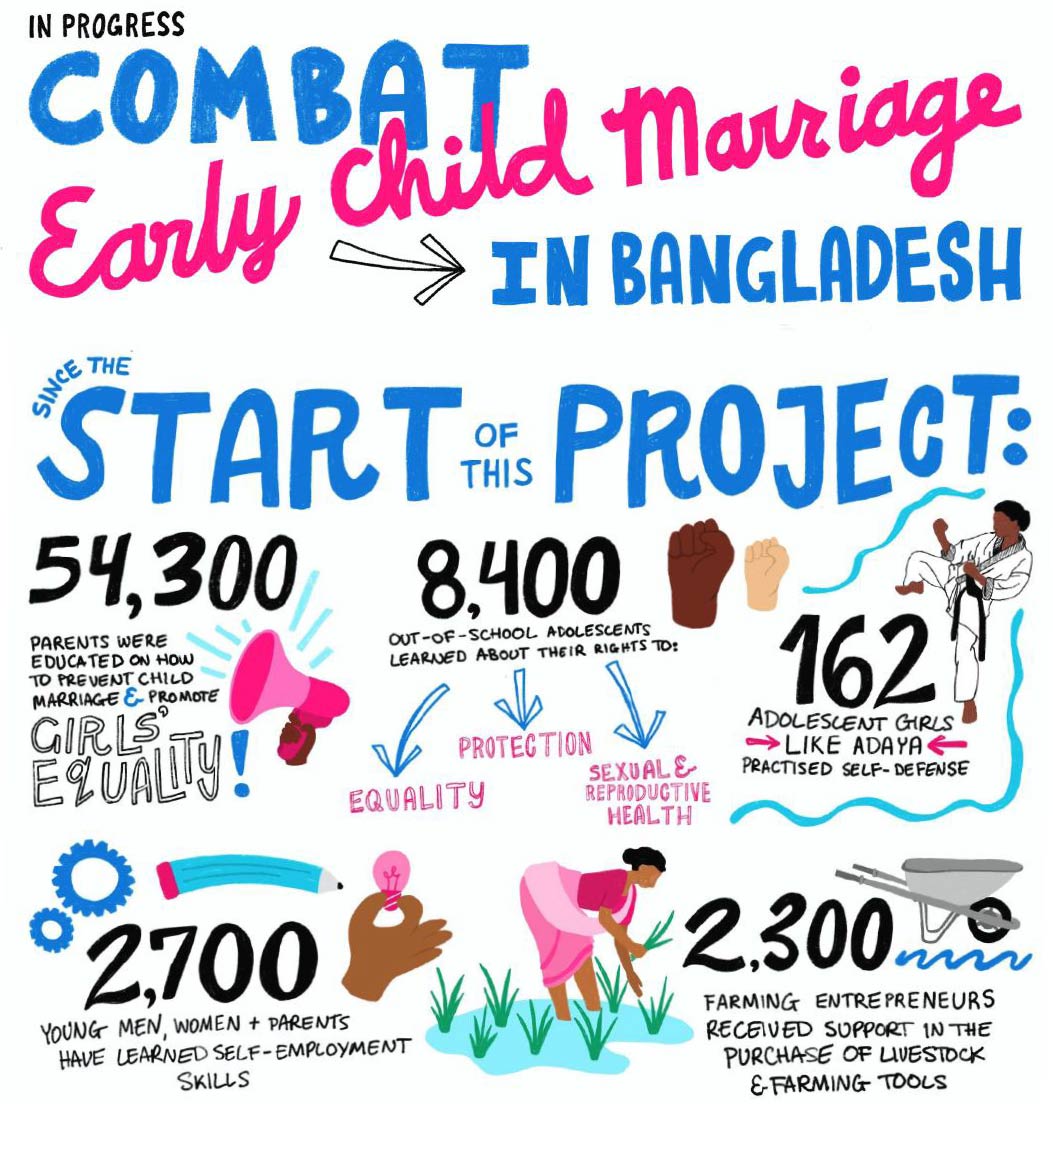 A drawing showing the results of the Combatting Early Marriage in Bangladesh project, run by Plan International Canada in partnership with the Government of Canada. It says, “Since the start of this project, 54,300 parents were educated on how to prevent child marriage and promote girls’ equality; 8,400 out-of-school adolescents learned about their rights to equality, protection and sexual and reproductive health 162 adolescent girls, like Adaya, practised self-defence; 2,700 young men, women and parents have learned self-employment skills; 2,300 farming entrepreneurs received support through the purchase of livestock and farming tools.